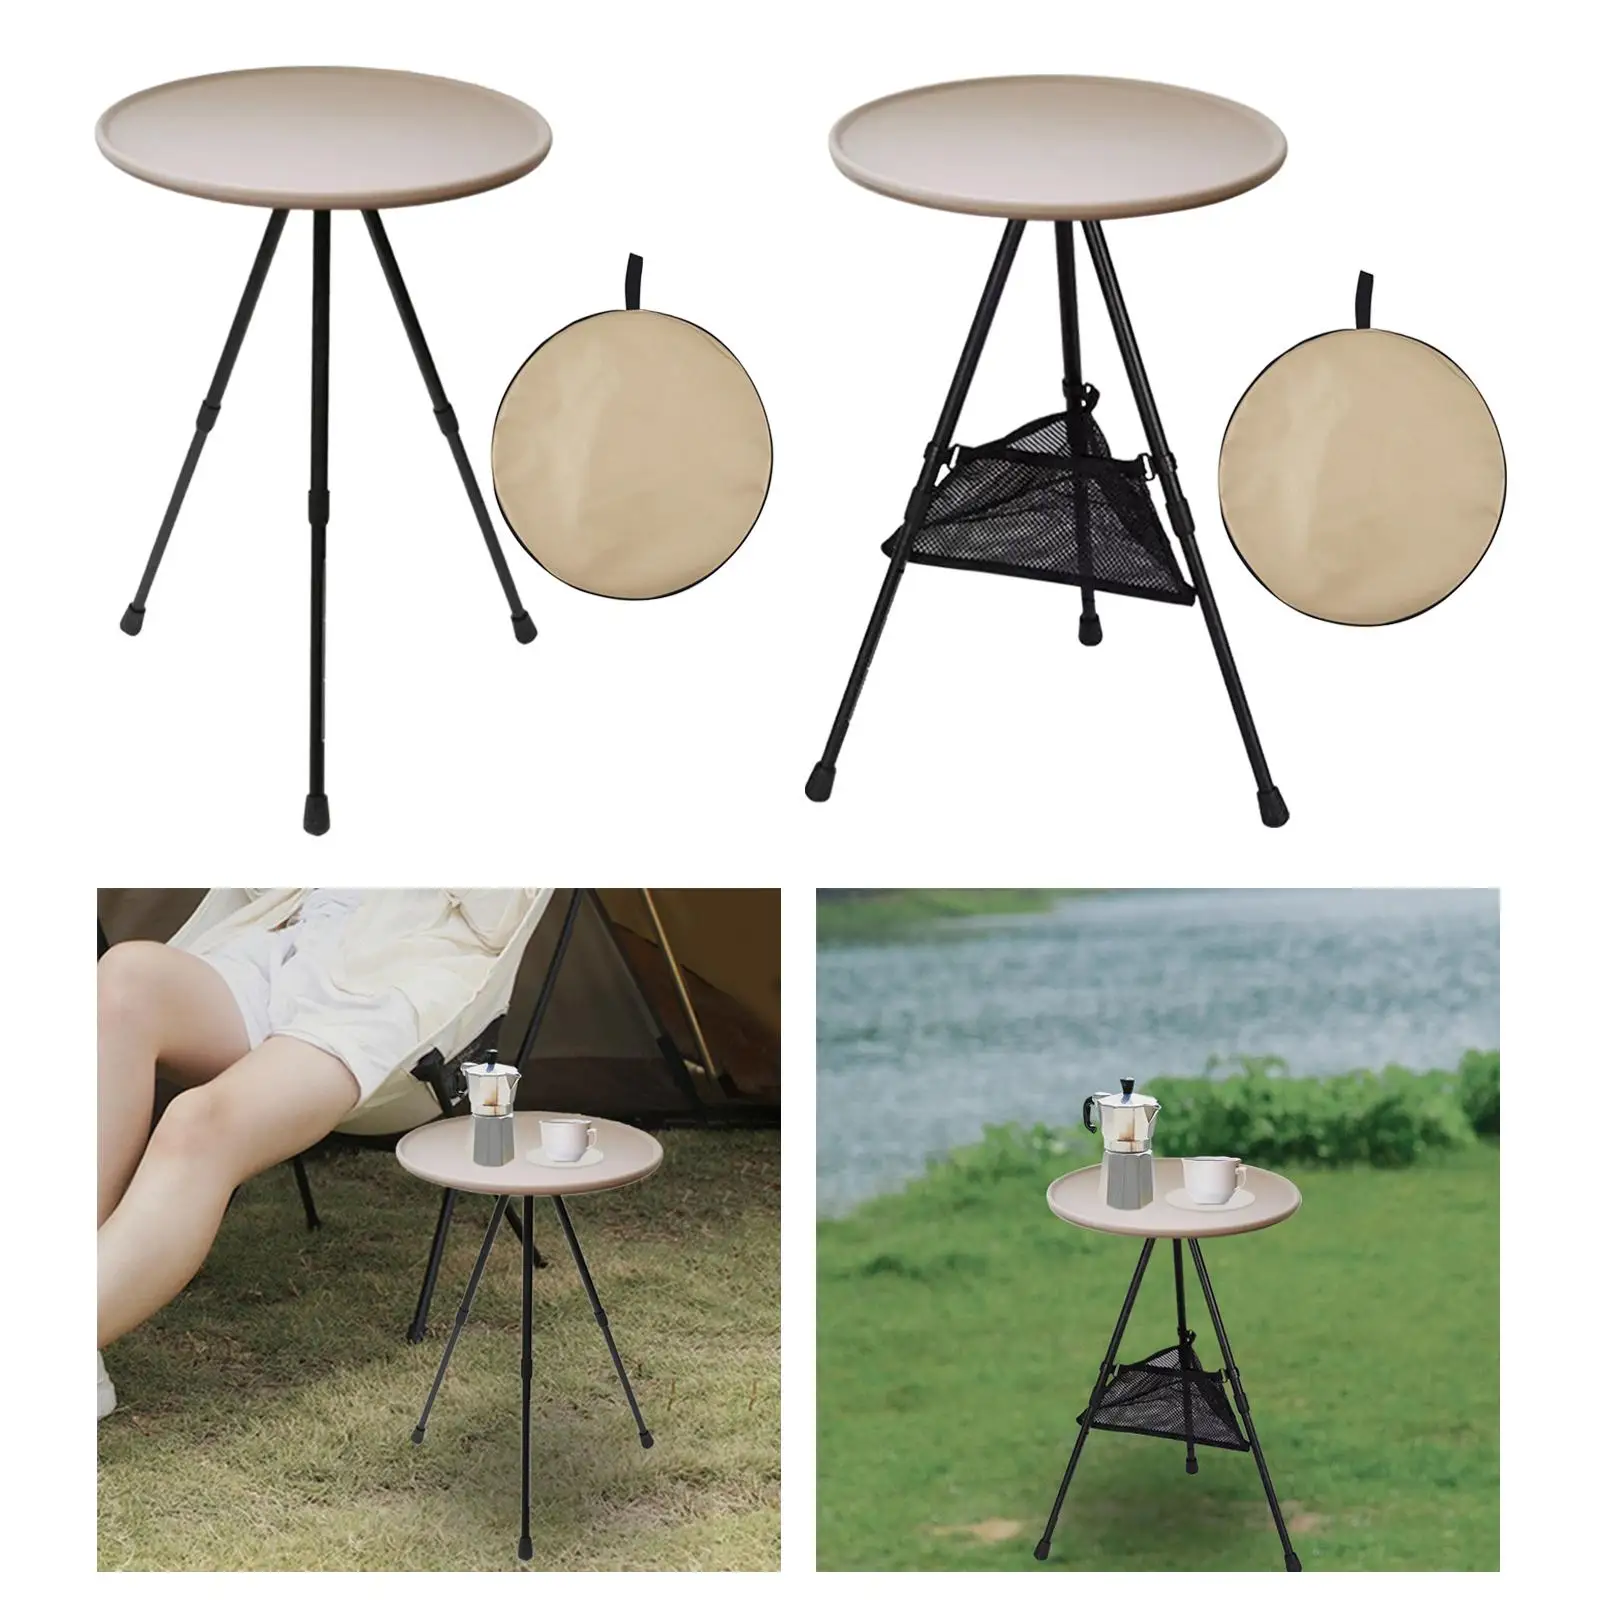 Foldable Picnic Table Tea Coffee Table Portable Camping Table Lifting Table Outdoor Folding Round Table for Hiking Party Cooking